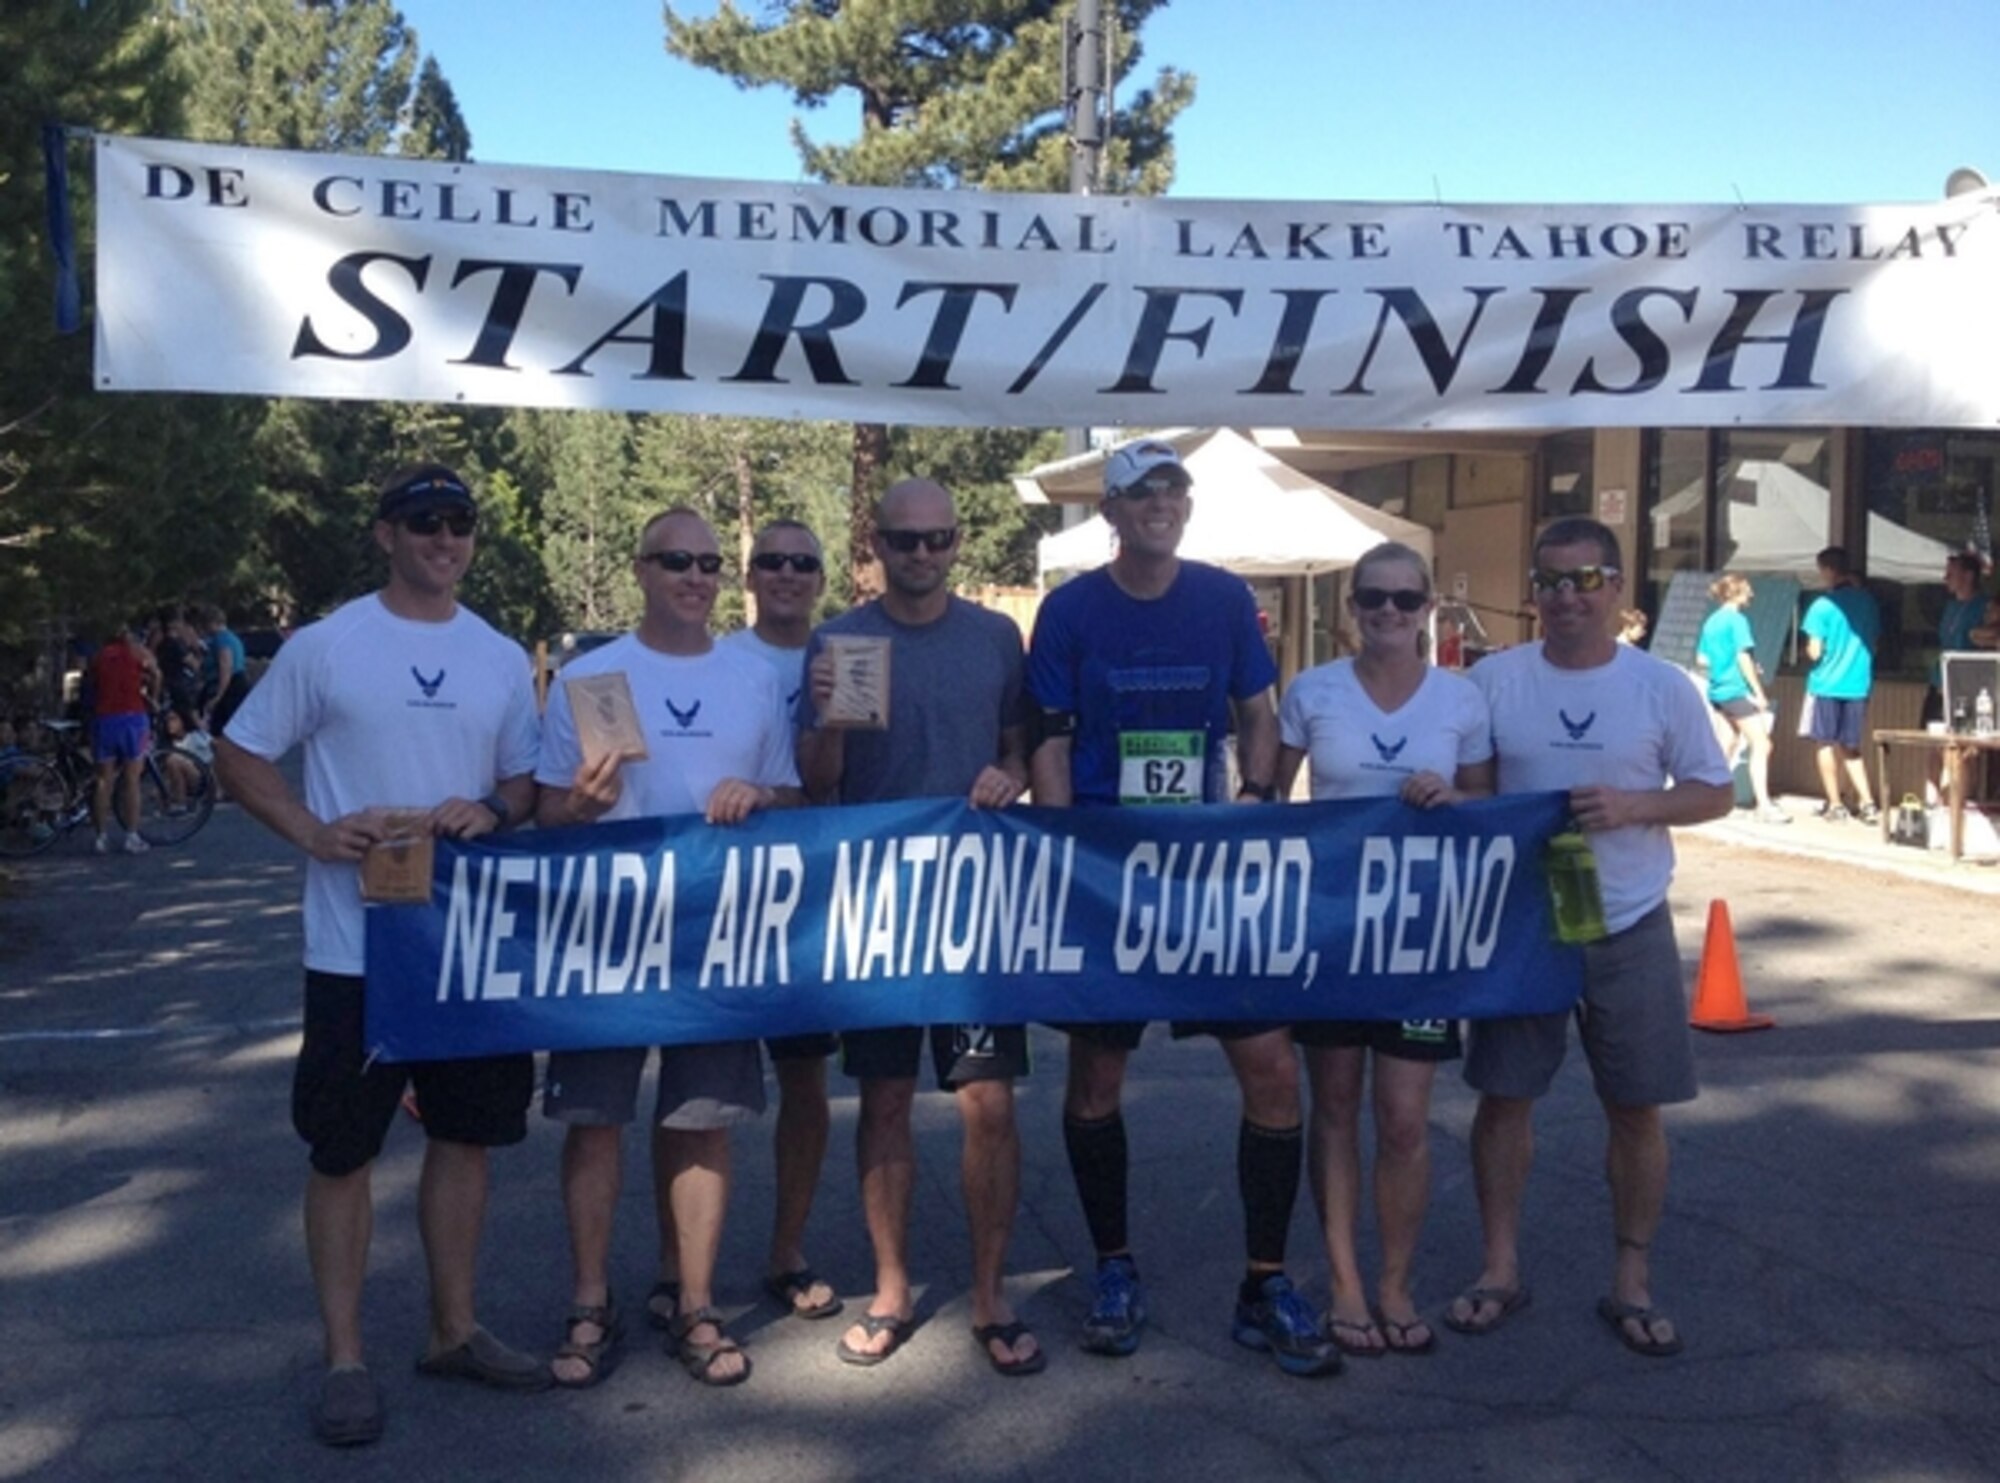 The Nevada Air National Guard team took first place in the corporate division of the 49th Annual DeCelle Memorial Lake Tahoe Relay on June 8. The team included, l to r, Staff Sgt. Joey Hodges, Senior Master Sgt. James Lindsay, Master Sgt. Sean O’Brien, 1st Lt. Masten Bethel, Maj. Jared Brandt, Staff Sgt. Katie Cromeenes and Master Sgt. Chris Barber.  NV ANG photo courtesy of 152nd Civil Engineer Squadron (released).